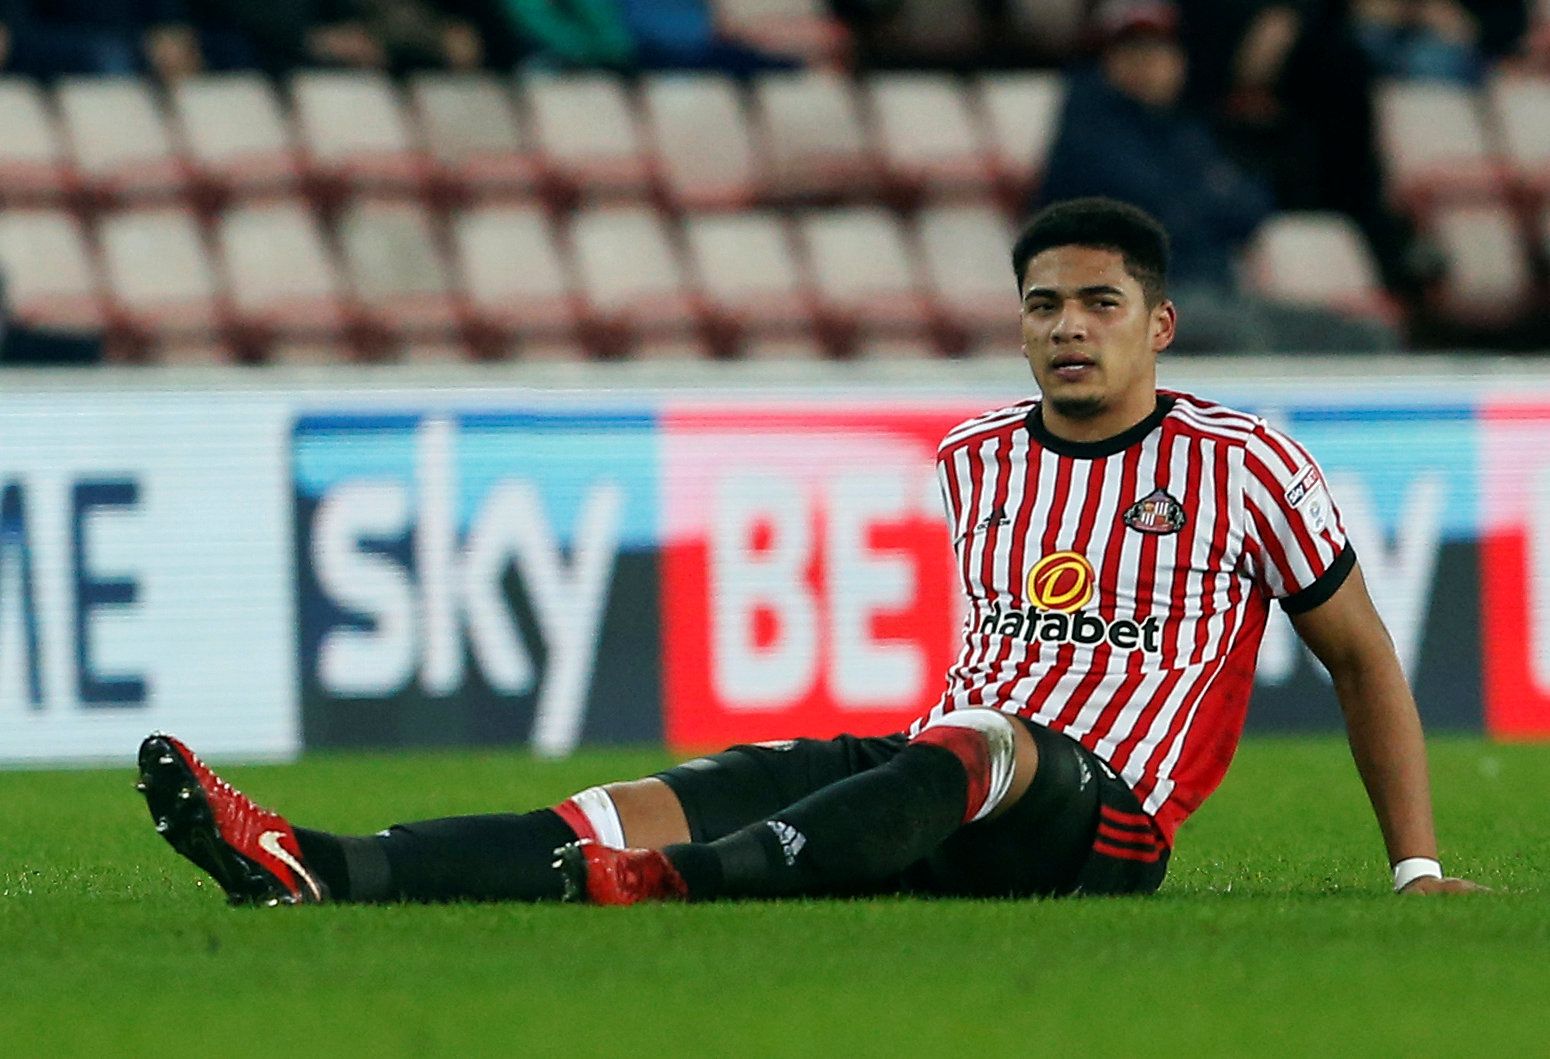 Soccer Football - Championship - Sunderland vs Aston Villa - Stadium of Light, Sunderland, Britain - March 6, 2018   Sunderland's Tyias Browning lies injured   Action Images/Craig Brough    EDITORIAL USE ONLY. No use with unauthorized audio, video, data, fixture lists, club/league logos or 